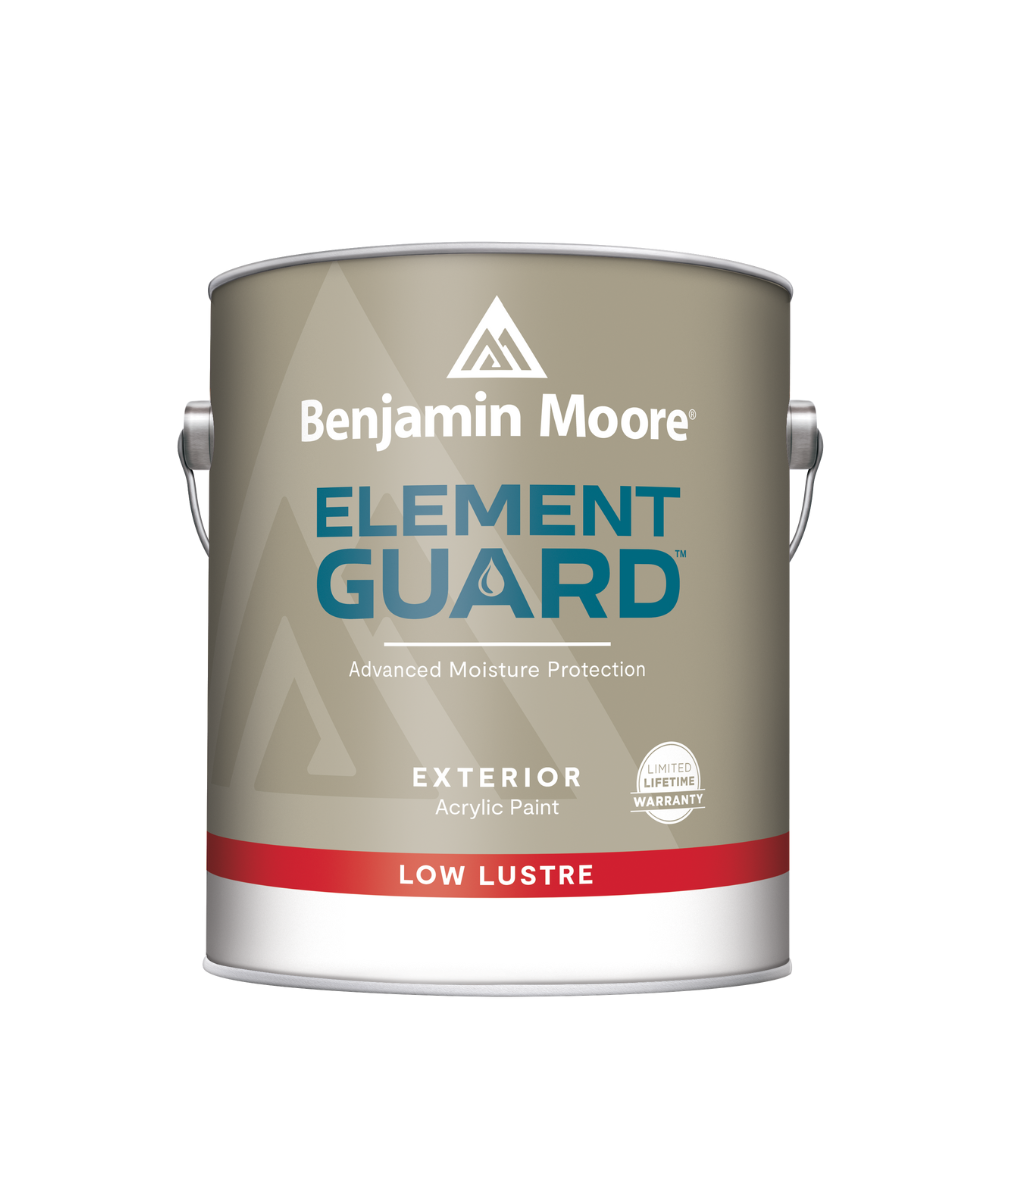 Benjamin Moore&#39;s Element Guard Exterior Low Lustre Paint with Advanced Moisture Protection. Available at JC Licht in Chicago, IL.